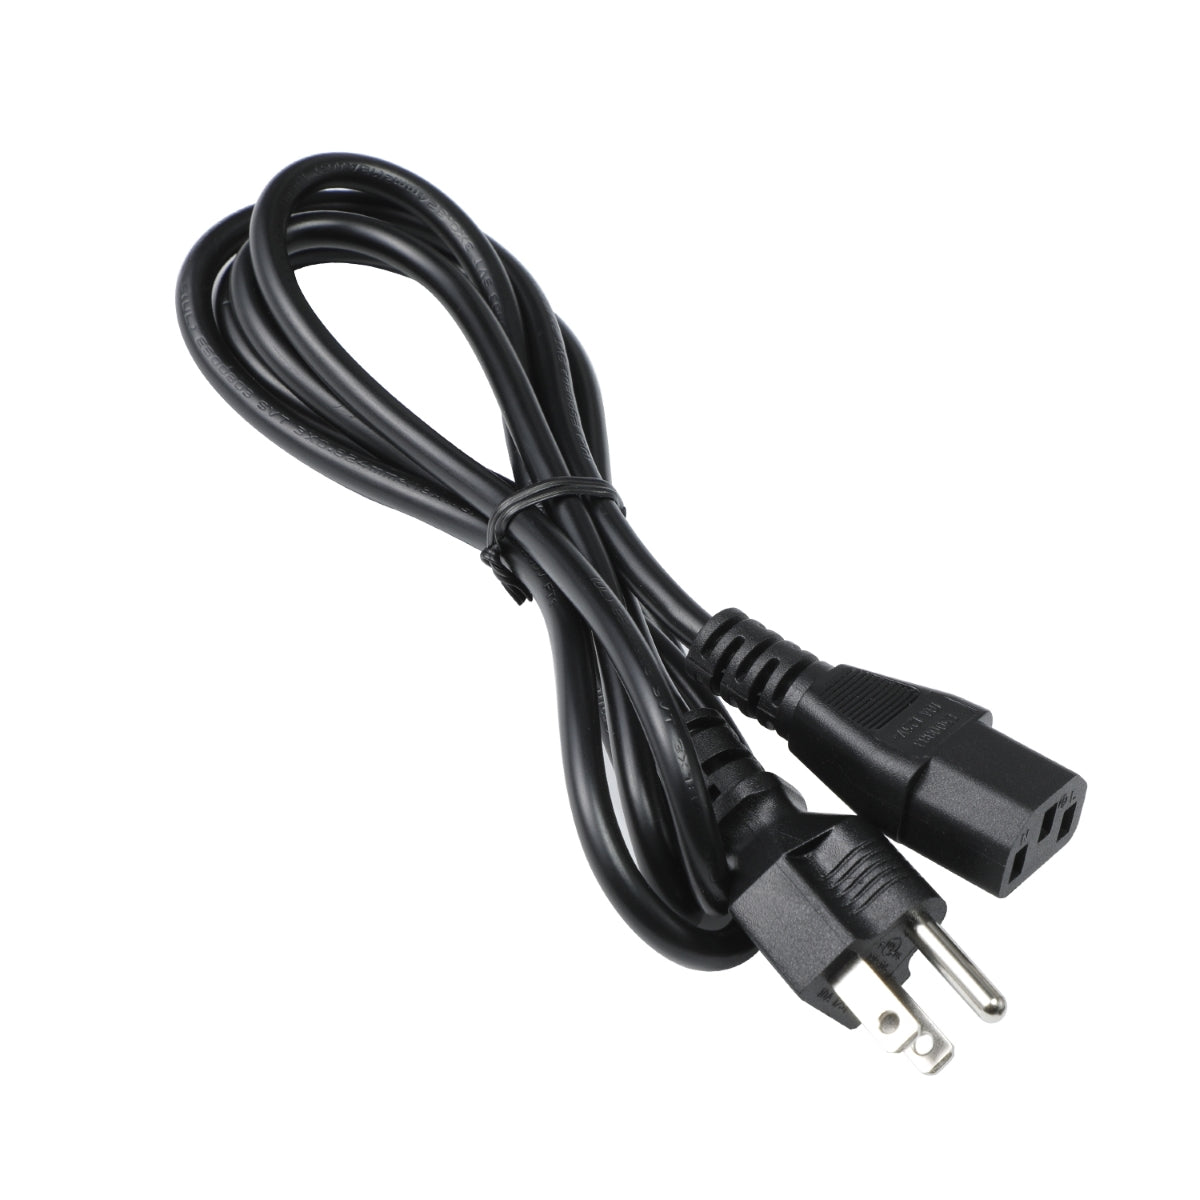 Power Cord for HP Pavilion 550-126 Computer.